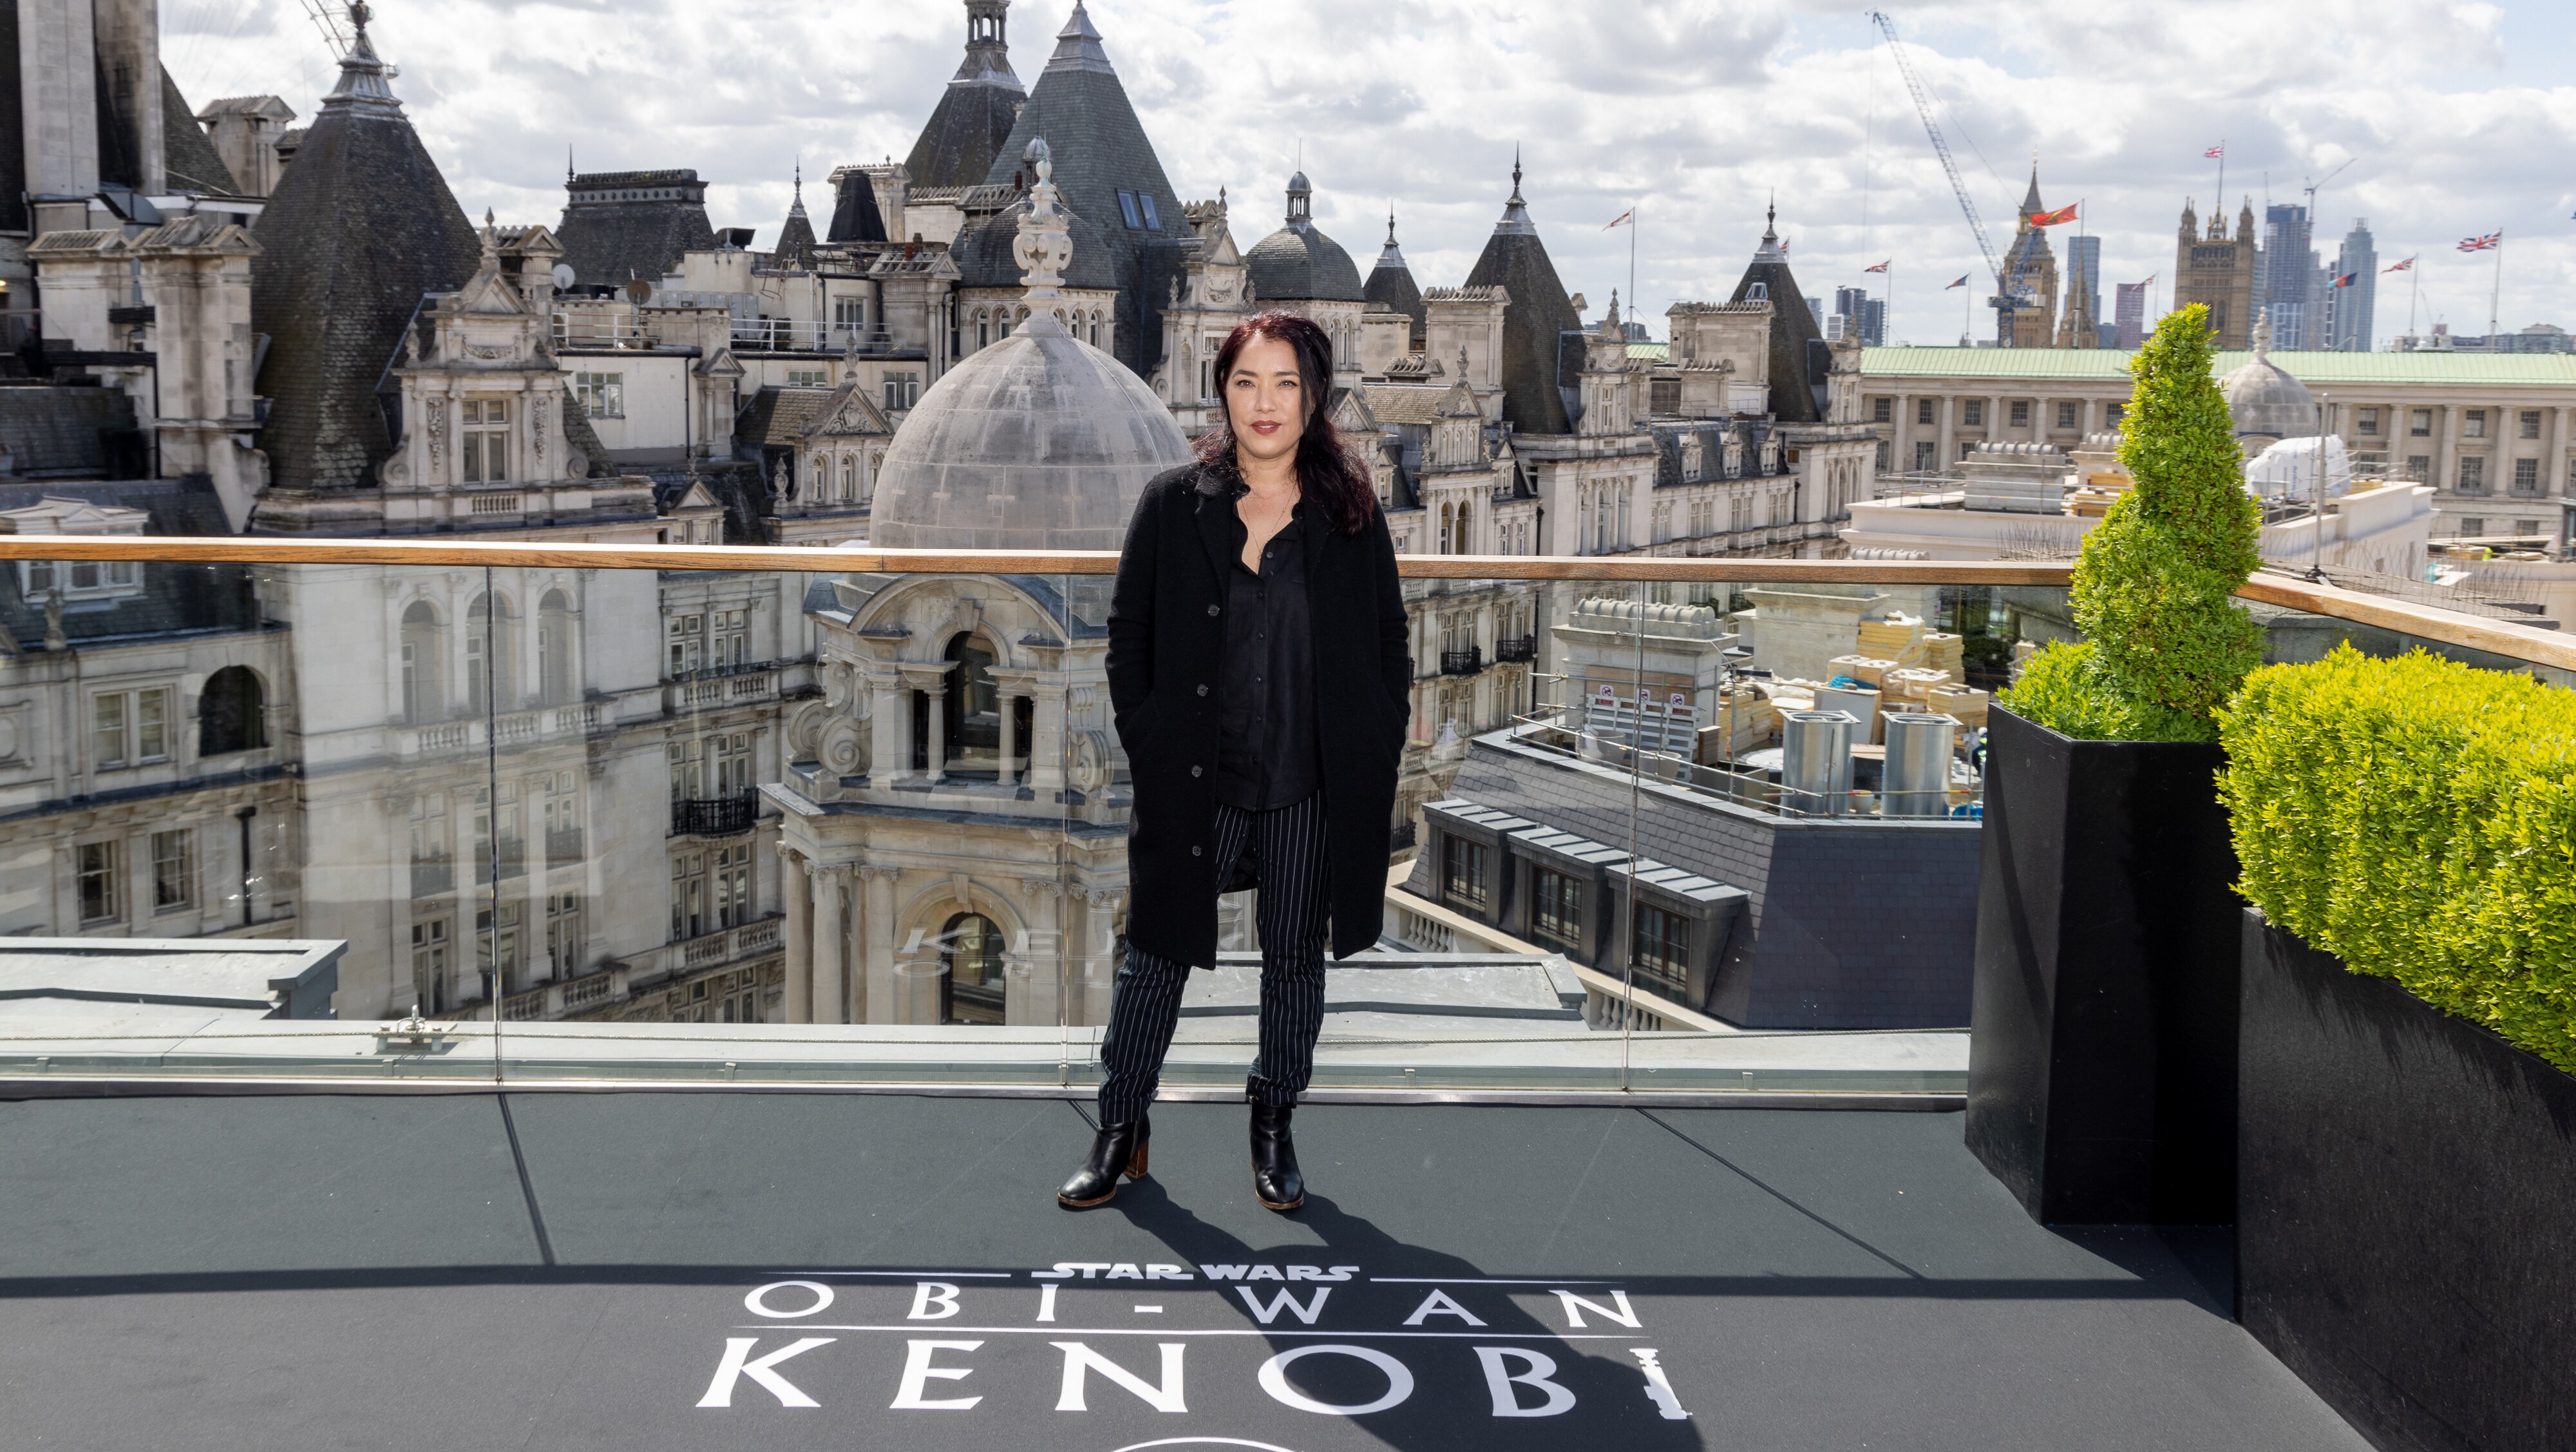 LONDON, ENGLAND - MAY 12:  Director and Executive Producer Deborah Chow attends the photocall for the new Disney+ limited series "Obi Wan Kenobi" at the Corinthia Hotel on May 12, 2022 in London, England. Obi-Wan Kenobi will be exclusively available on Disney+ from May 27. (Photo by StillMoving.net for Disney)